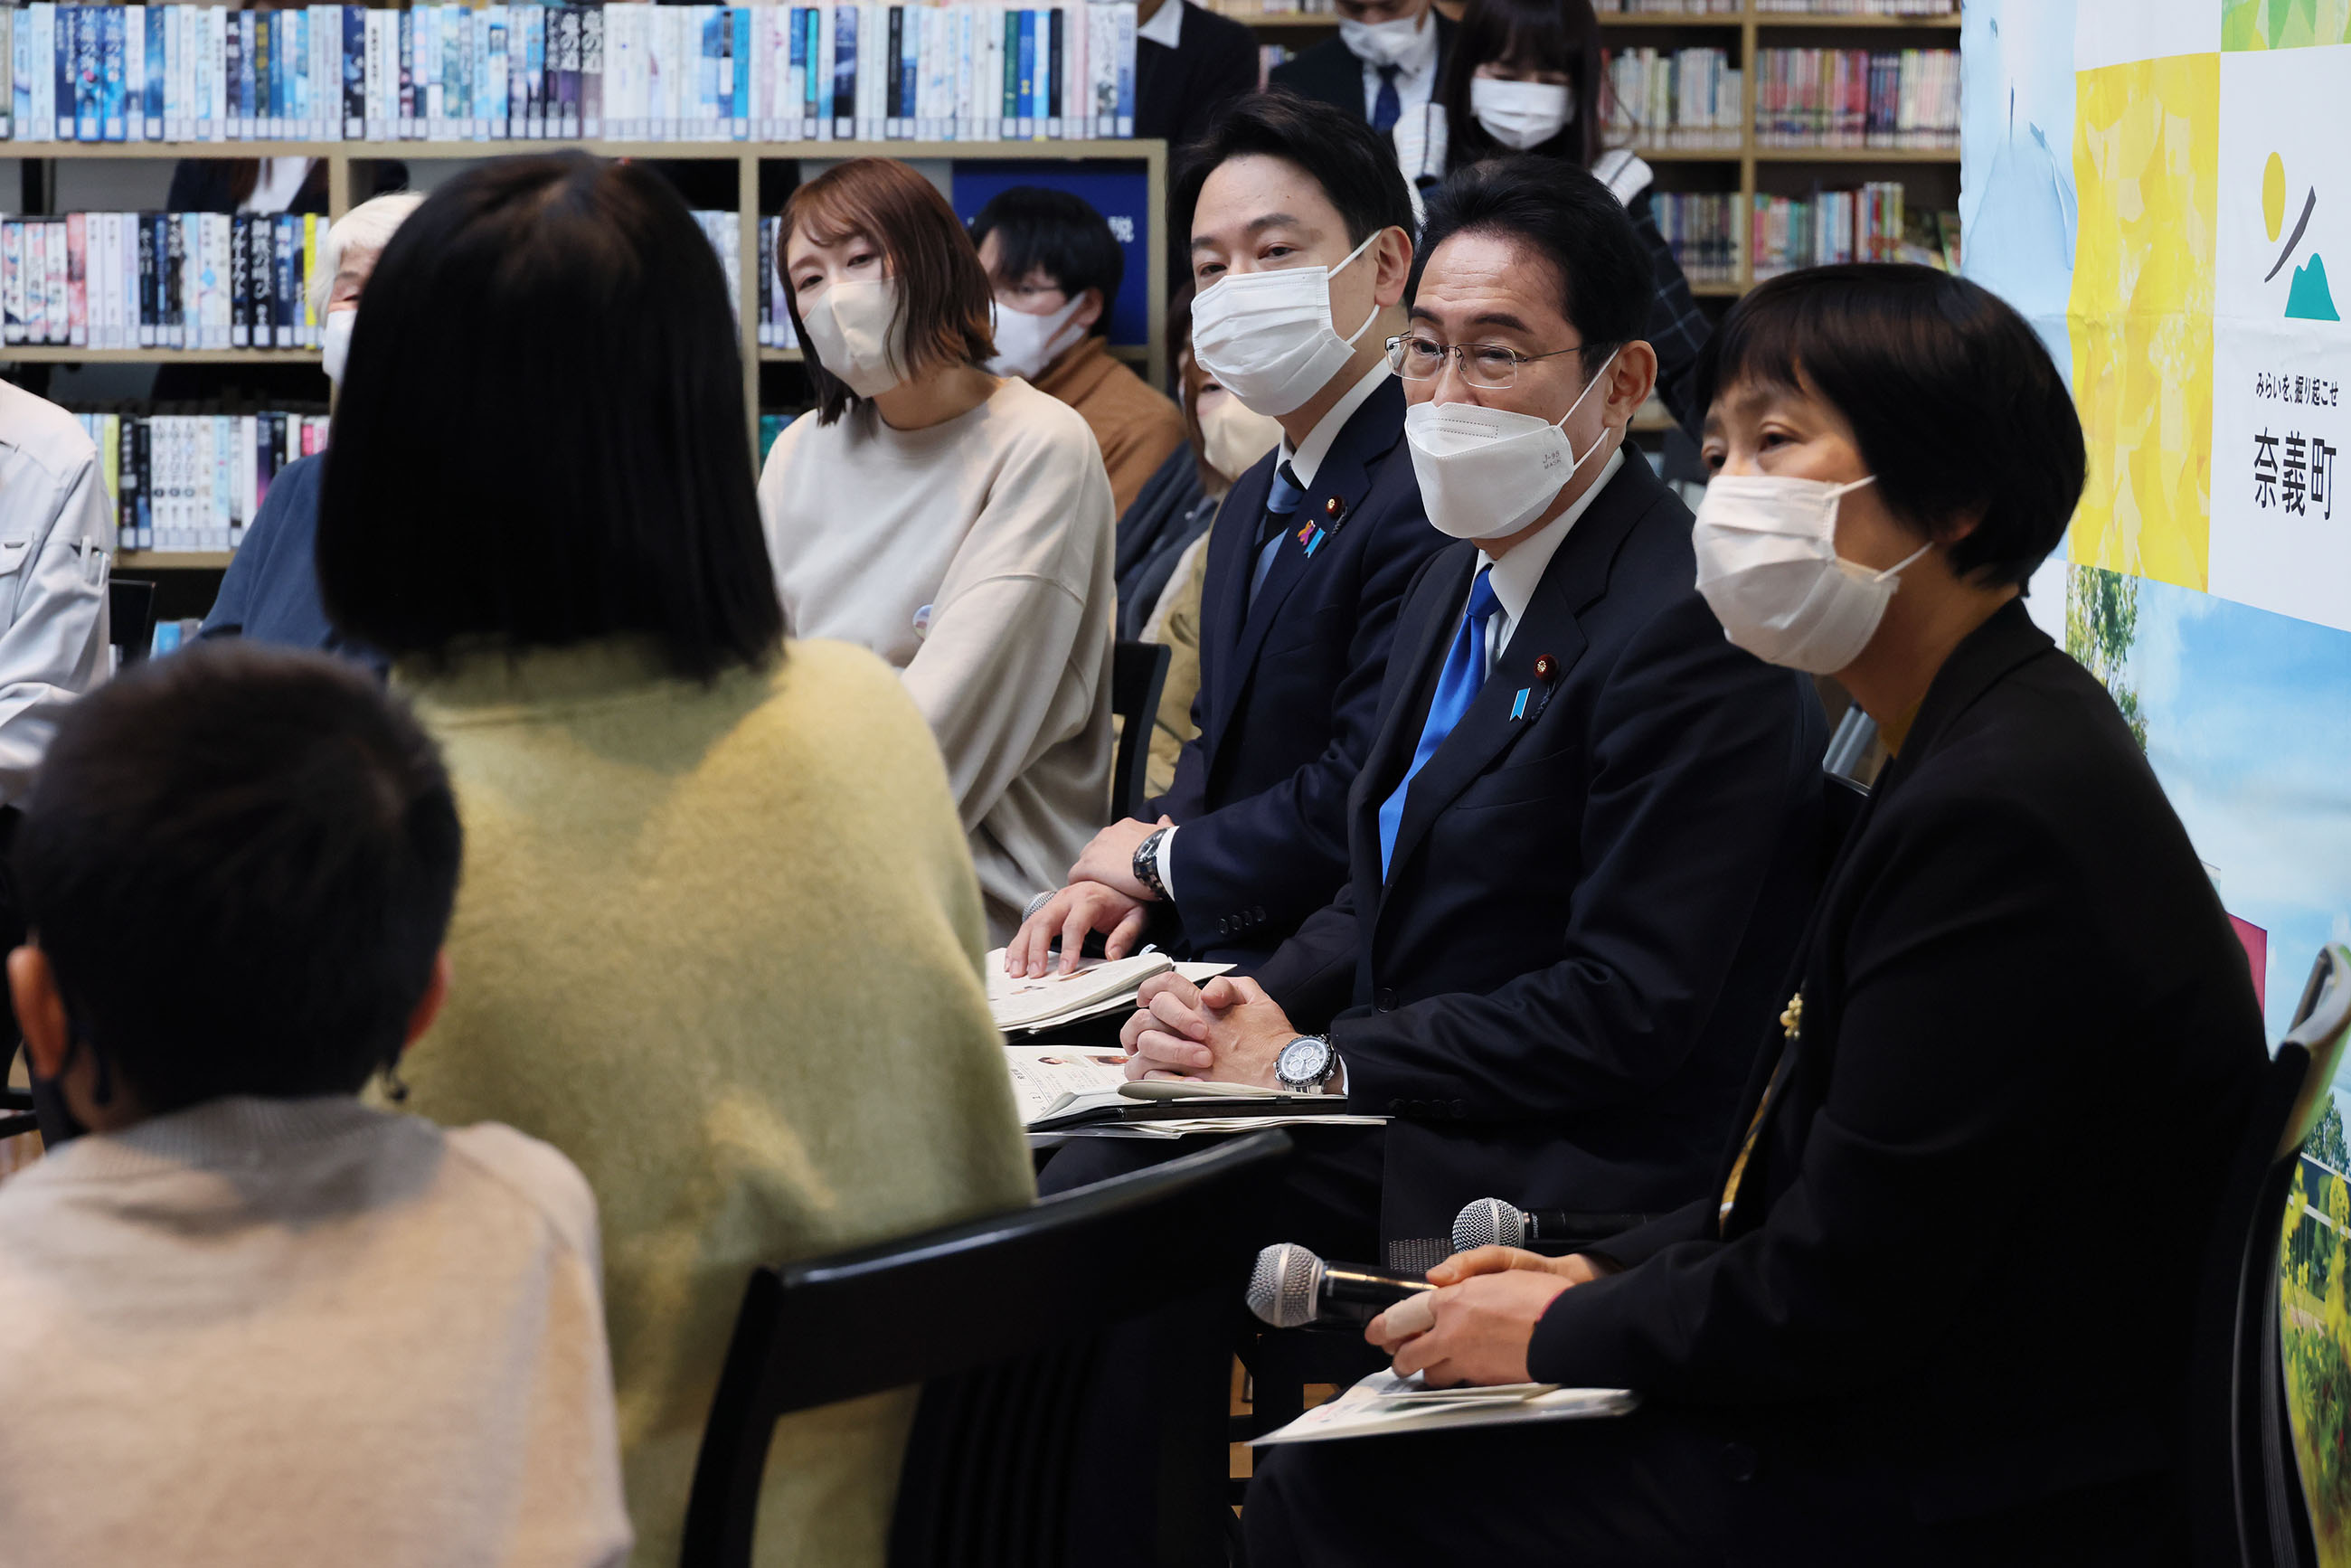 Prime Minster Kishida talking with participants in a public dialogue on policies related to children (6)